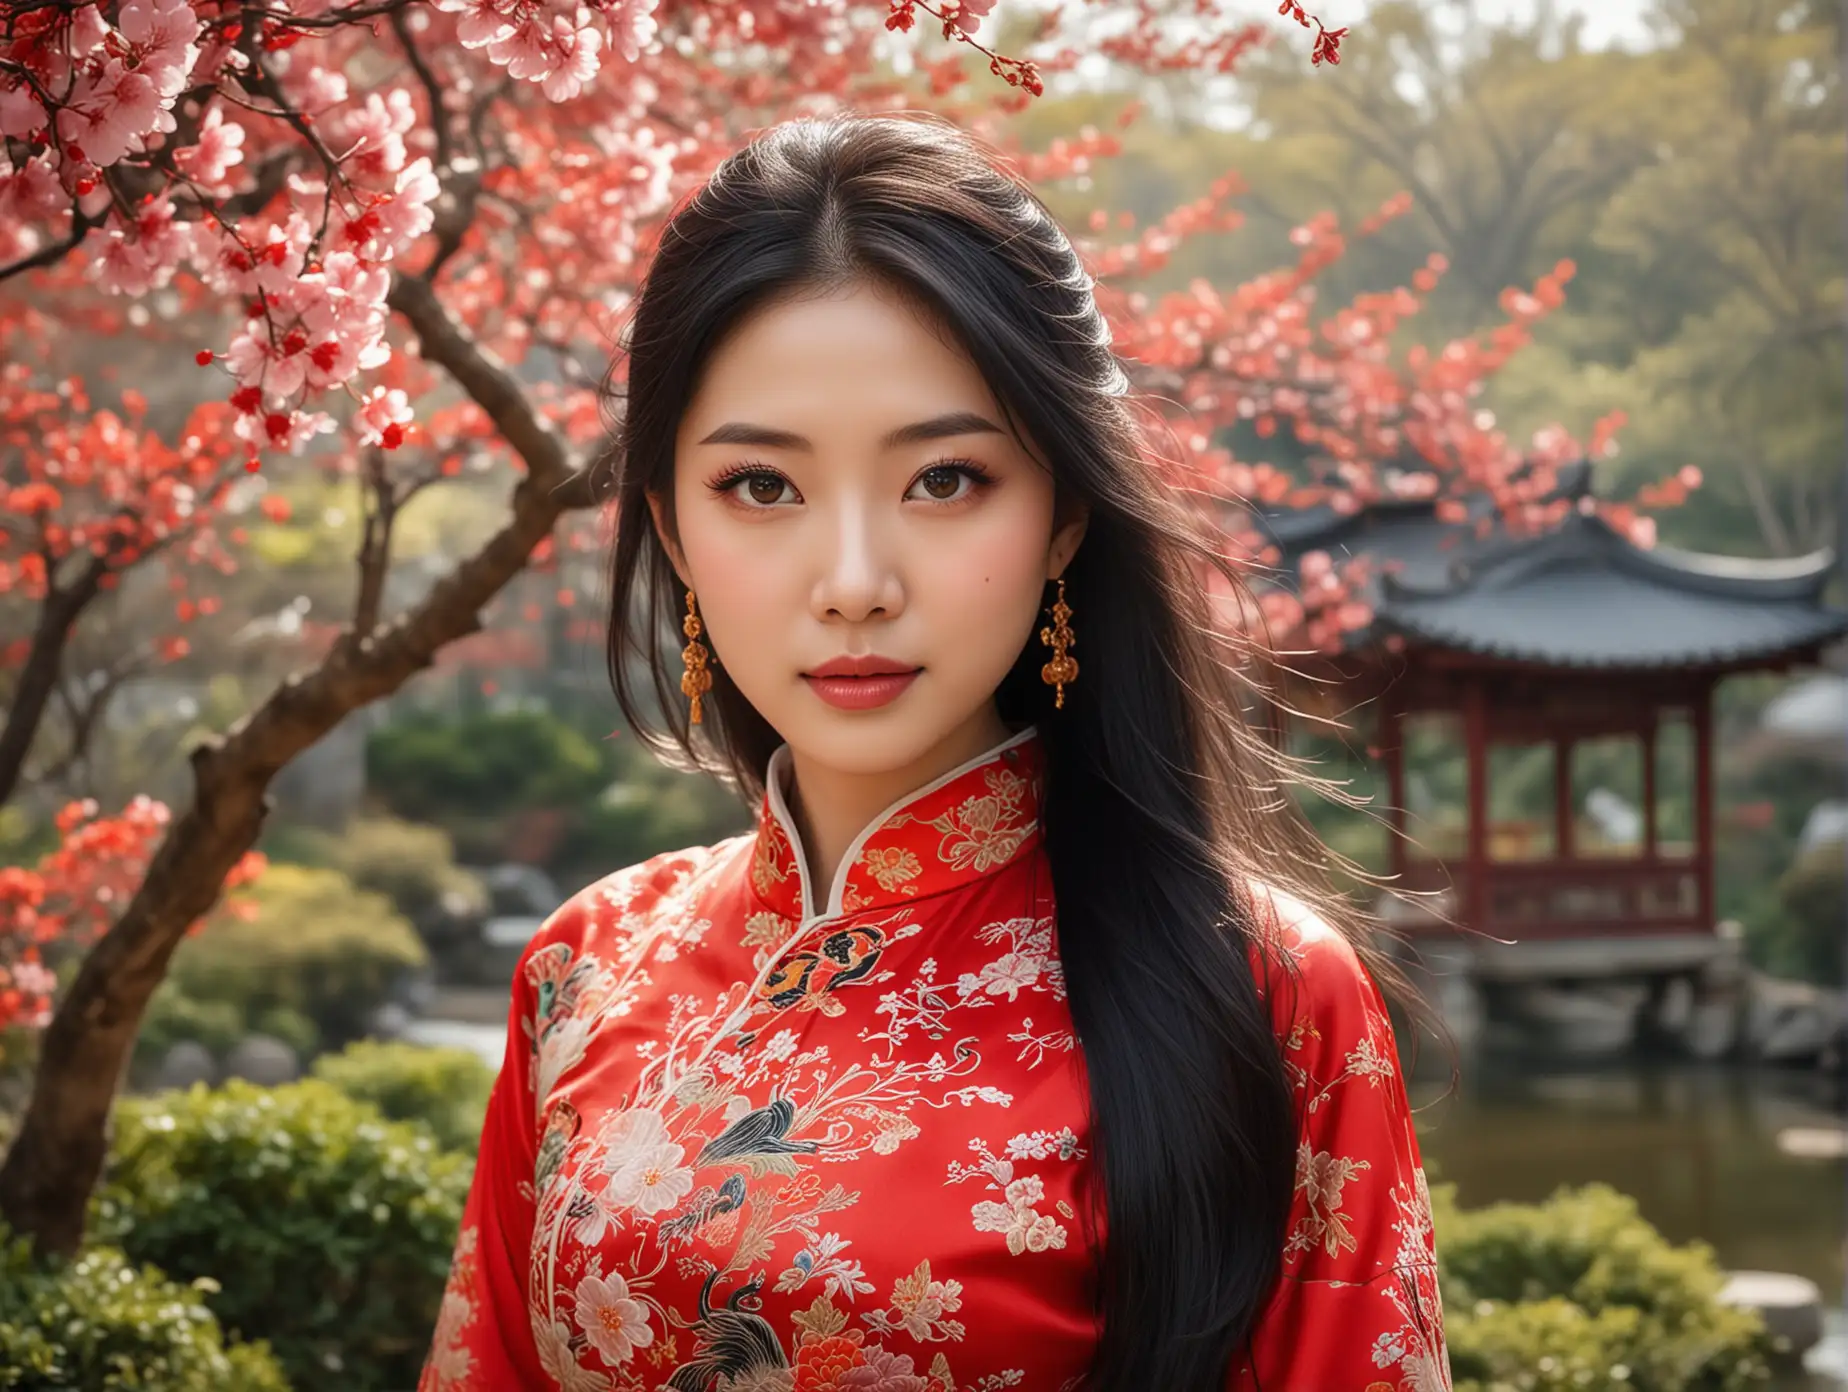 A beautiful Asian woman, long black hair flowing in the wind, smooth and delicate skin, refined features, bright big eyes with double eyelids, a straight nose, red and moist lips curved into a gentle smile. She is wearing a traditional silk cheongsam with intricate embroidery, the dress adorned with elaborate floral and dragon-phoenix patterns, vibrant colors. The serene garden setting has cherry blossoms in full bloom, petals gently swaying in the breeze, with flowing water, artificial hills and pavilions creating a peaceful and beautiful environment, filled with Eastern charm.